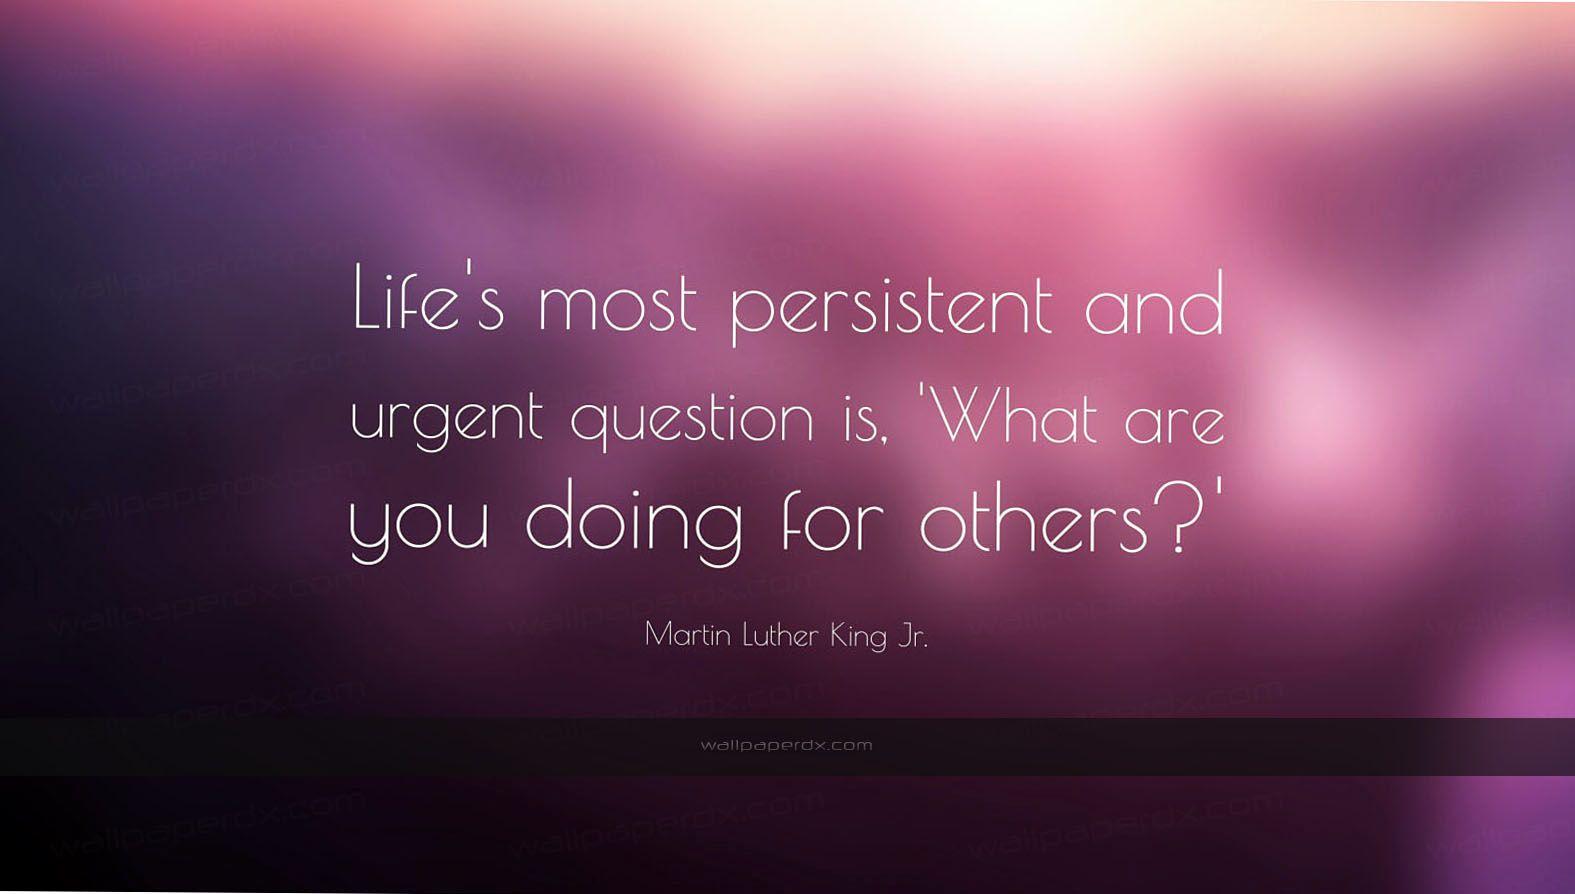 martin luther king jr quote life s most persistent and urgent